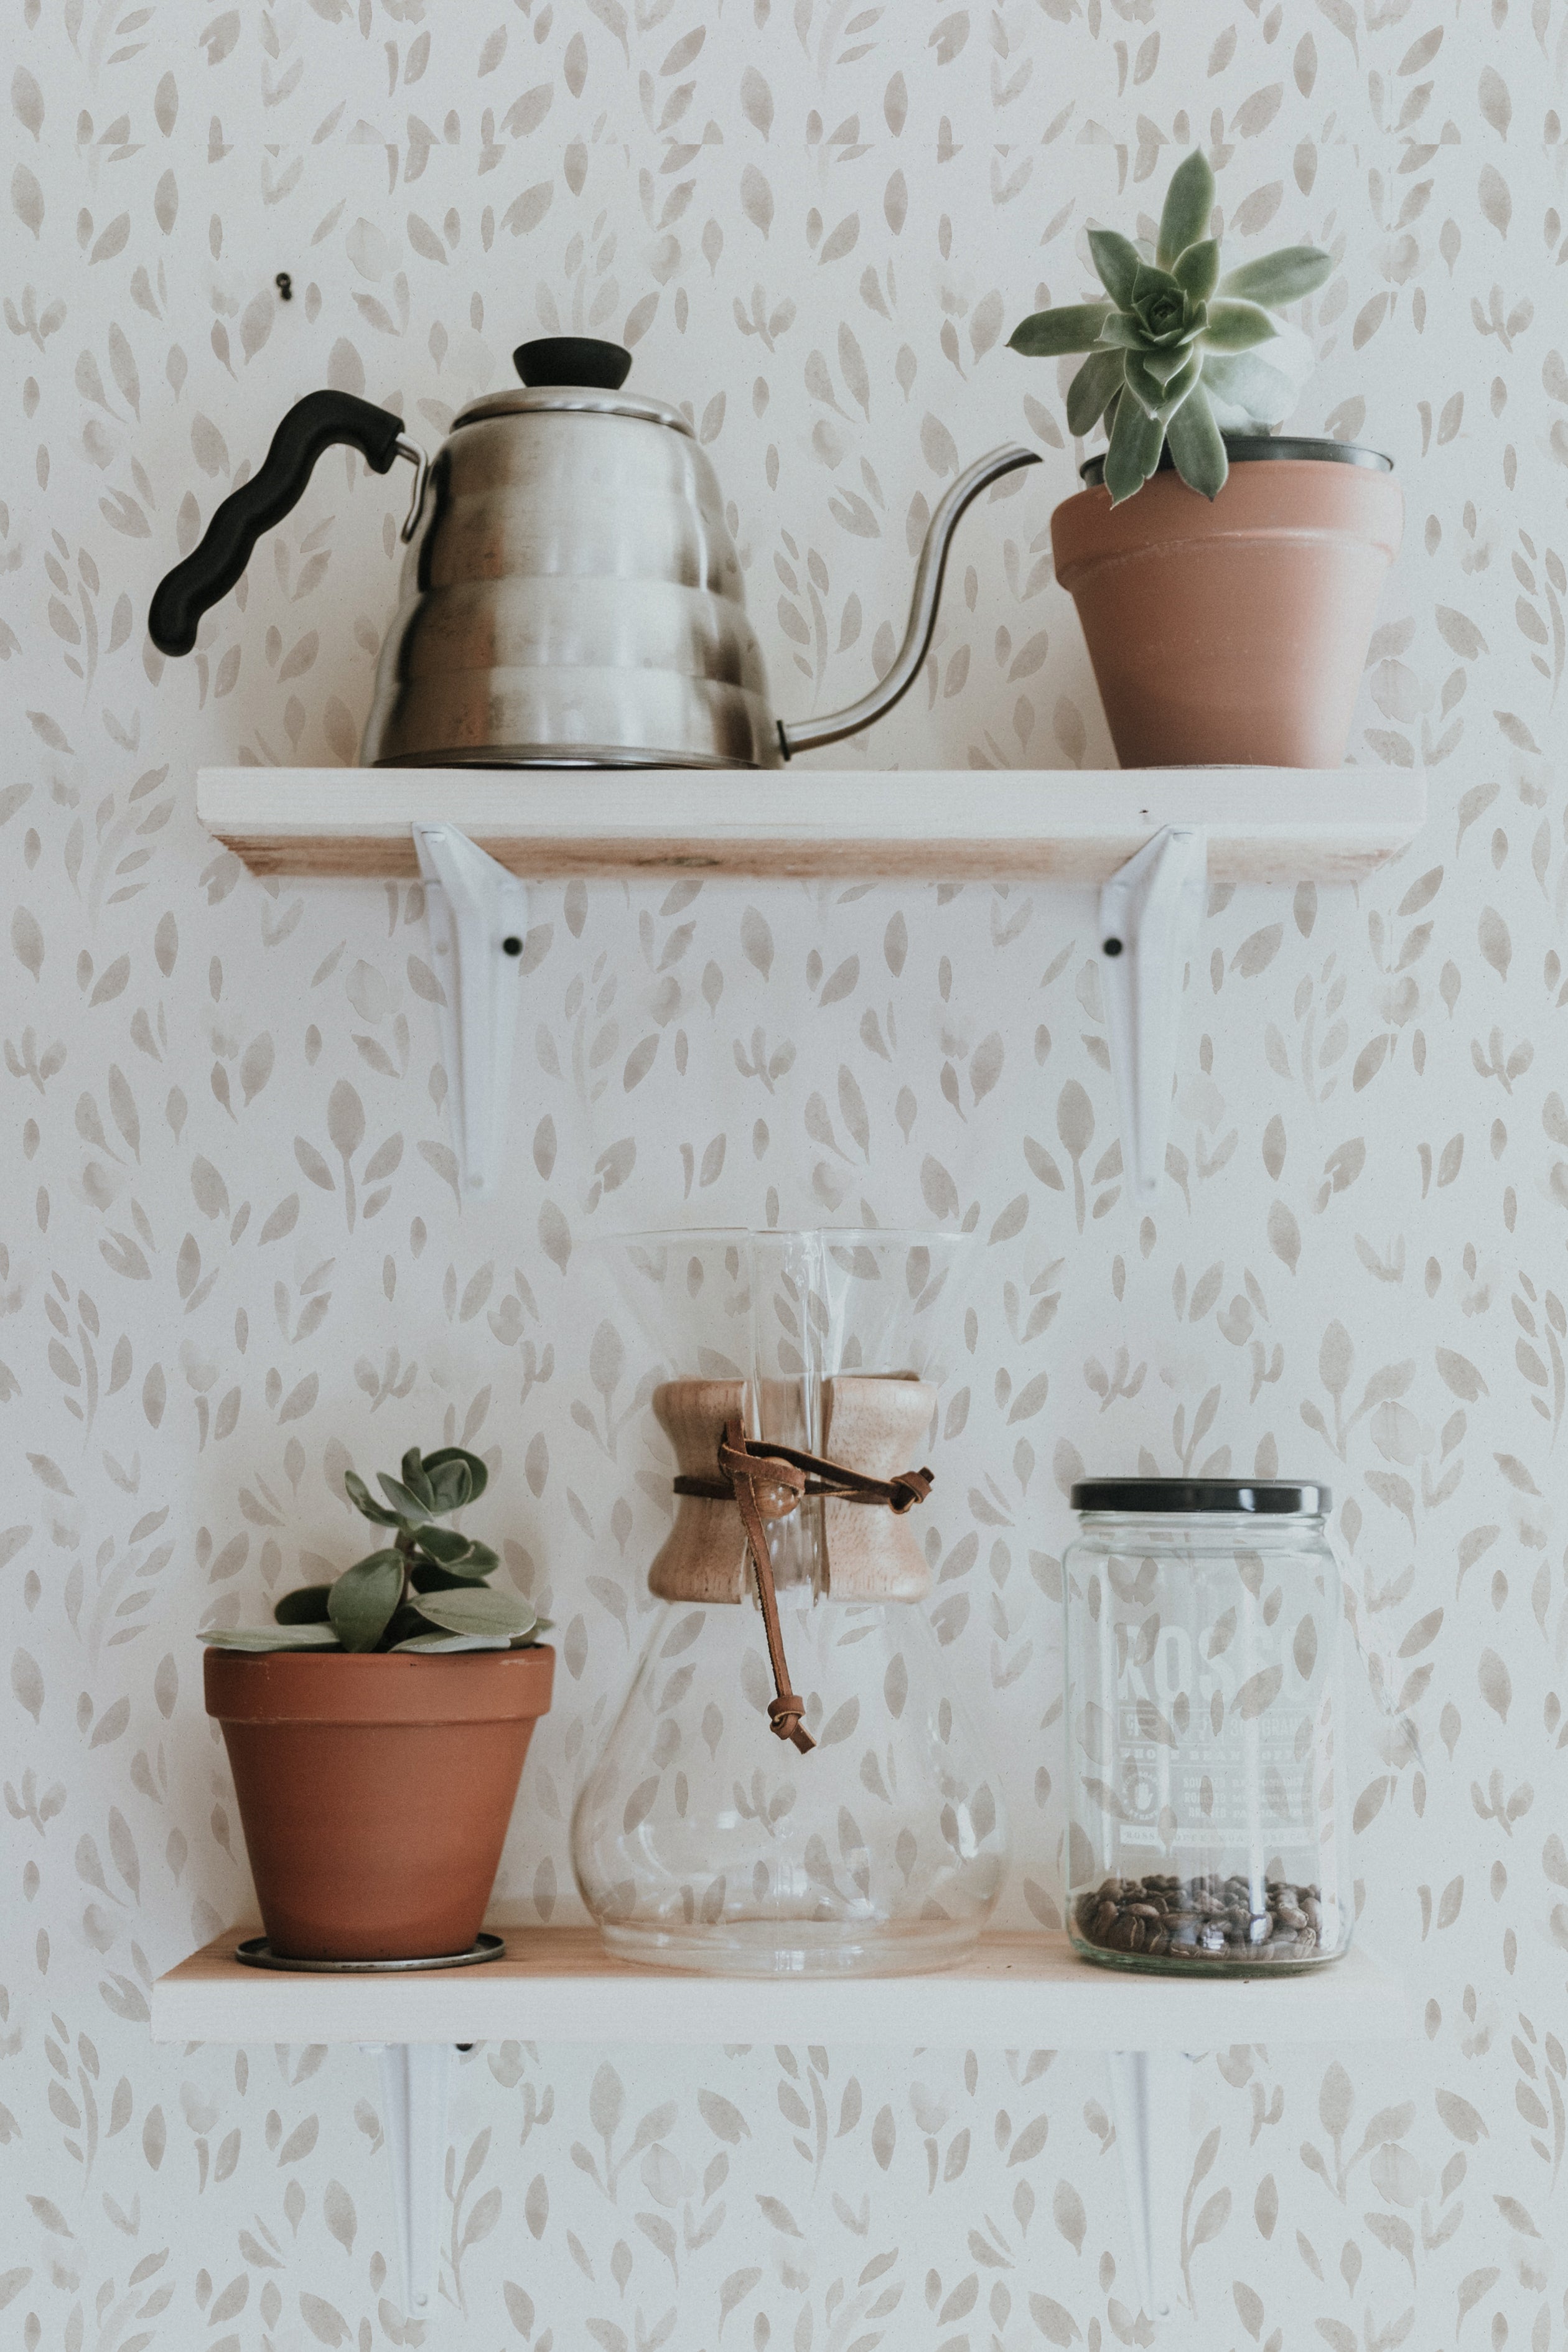 A homey kitchen scene with 'Subtle Botanica - Linen' wallpaper, displaying a pattern of soft gray leaves on a light linen background. Two white floating shelves hold a classic metal kettle, terracotta pots with green succulents, and glass jars.